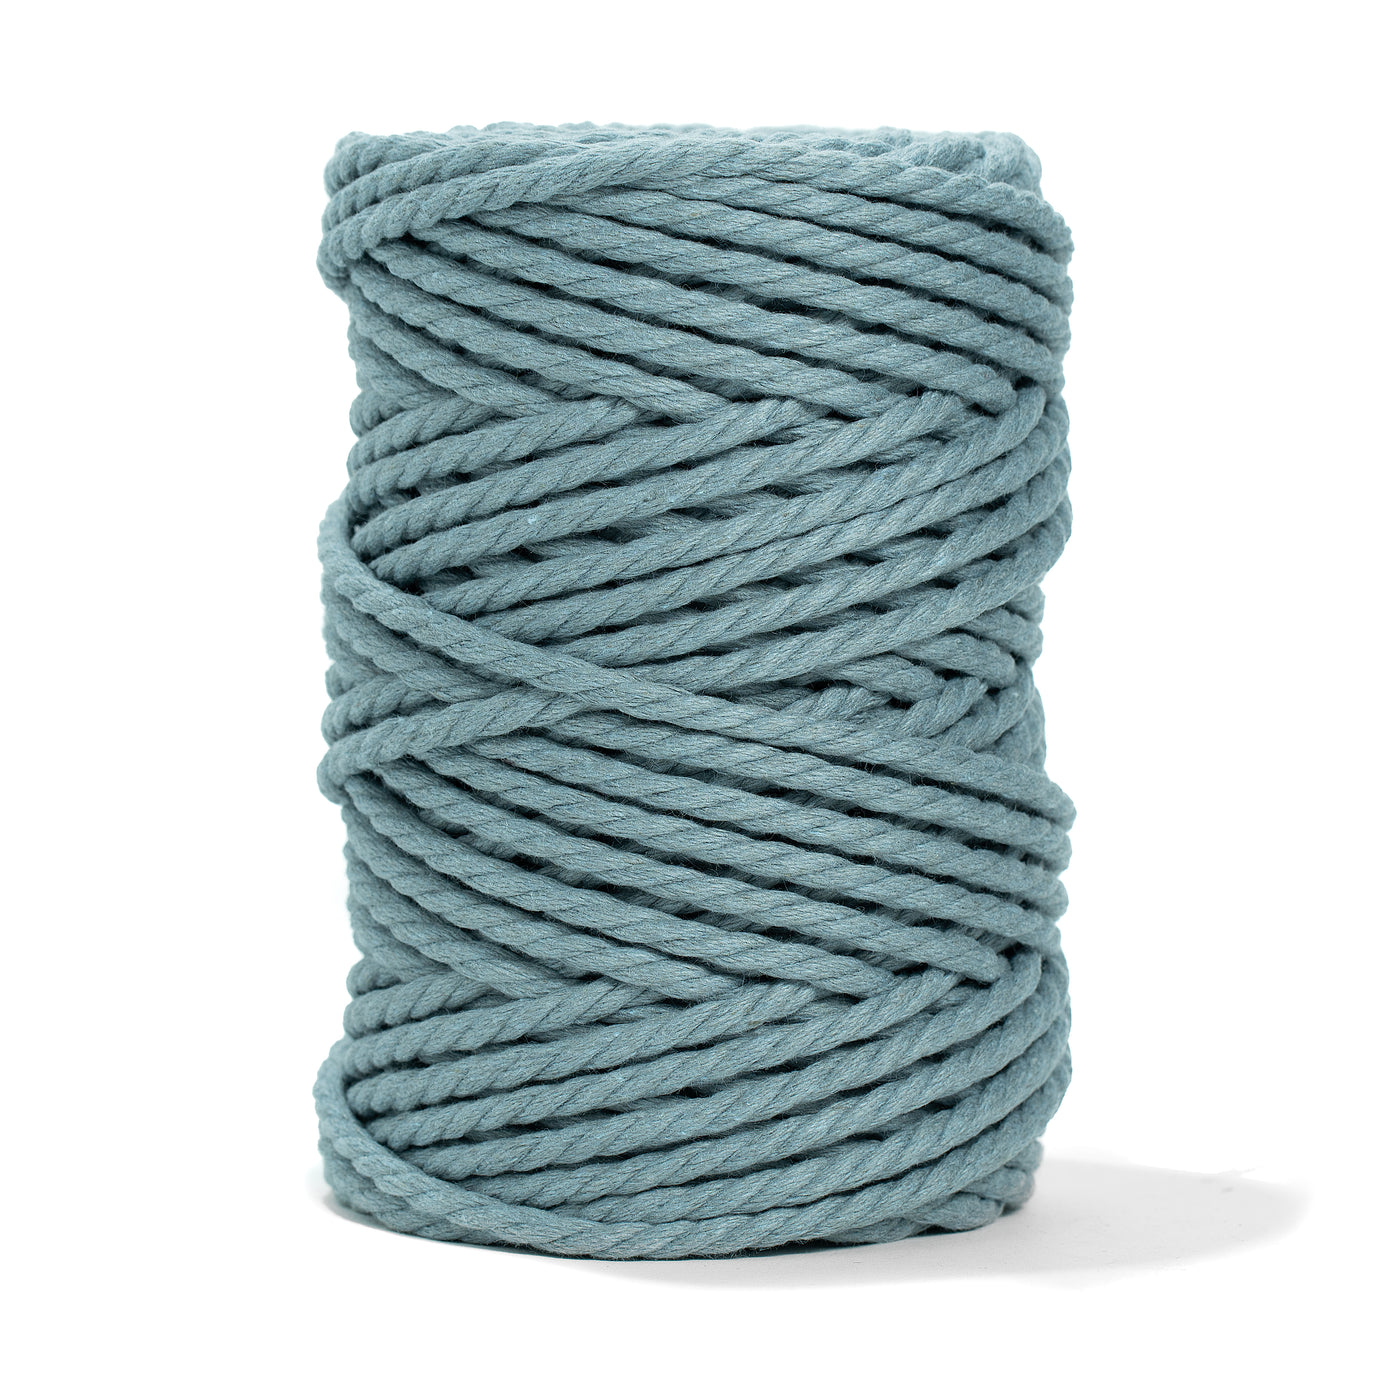 COTTON ROPE ZERO WASTE 5 MM - 3 PLY - CLOUDY BLUE COLOR